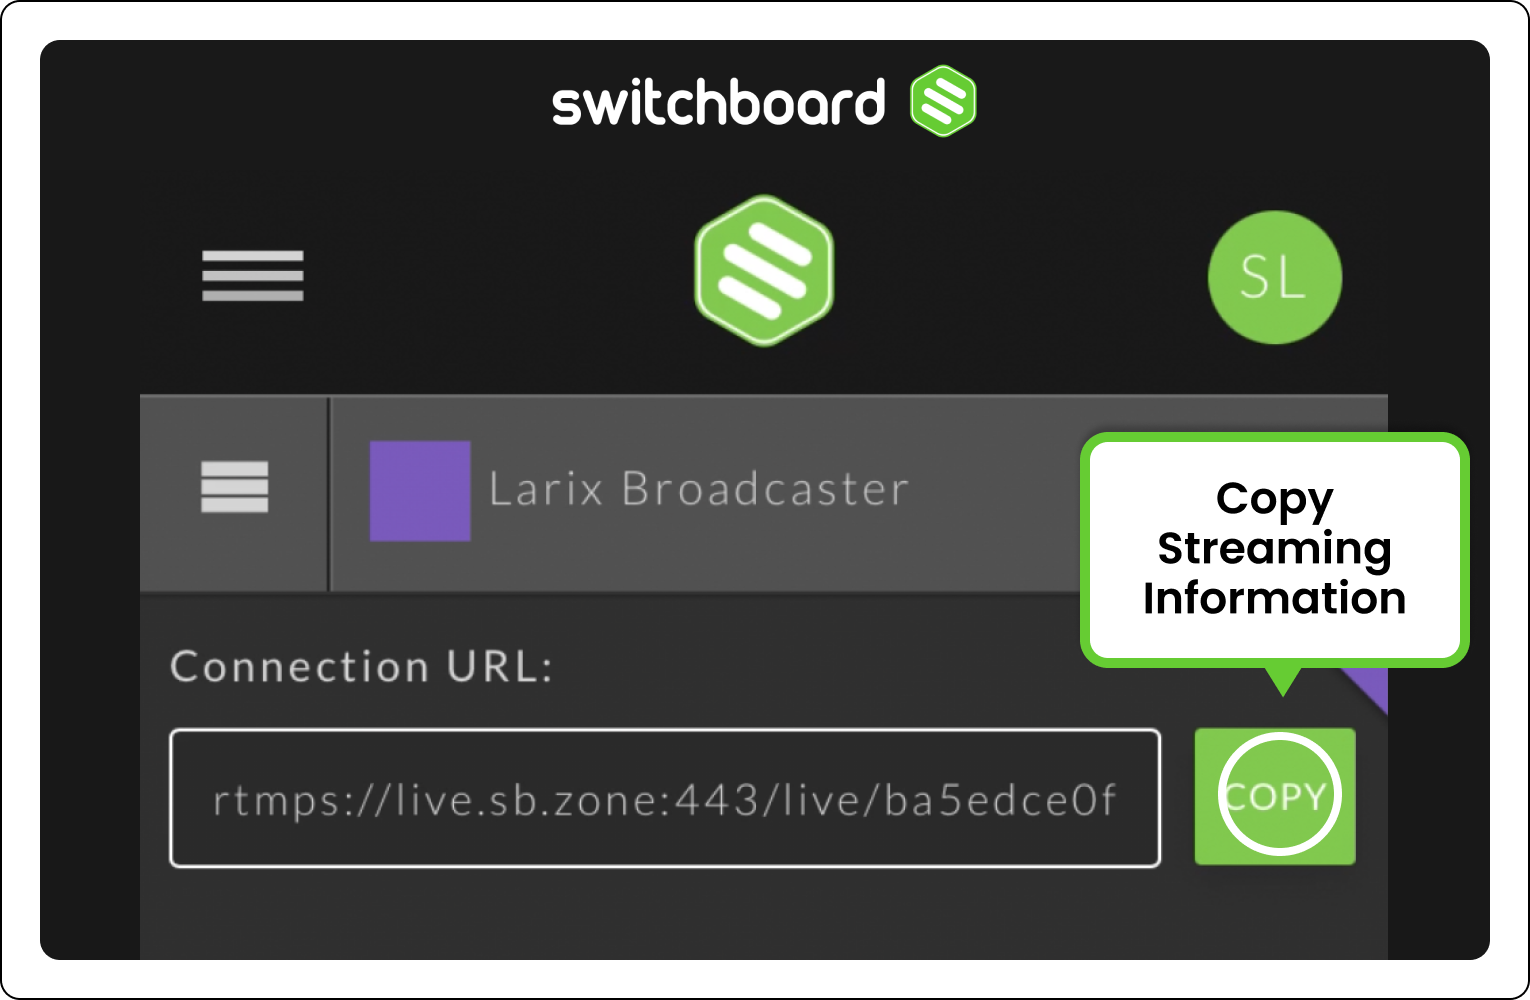 switchboard_cloud_Larix_broadcaster_copy_streaming_information.png